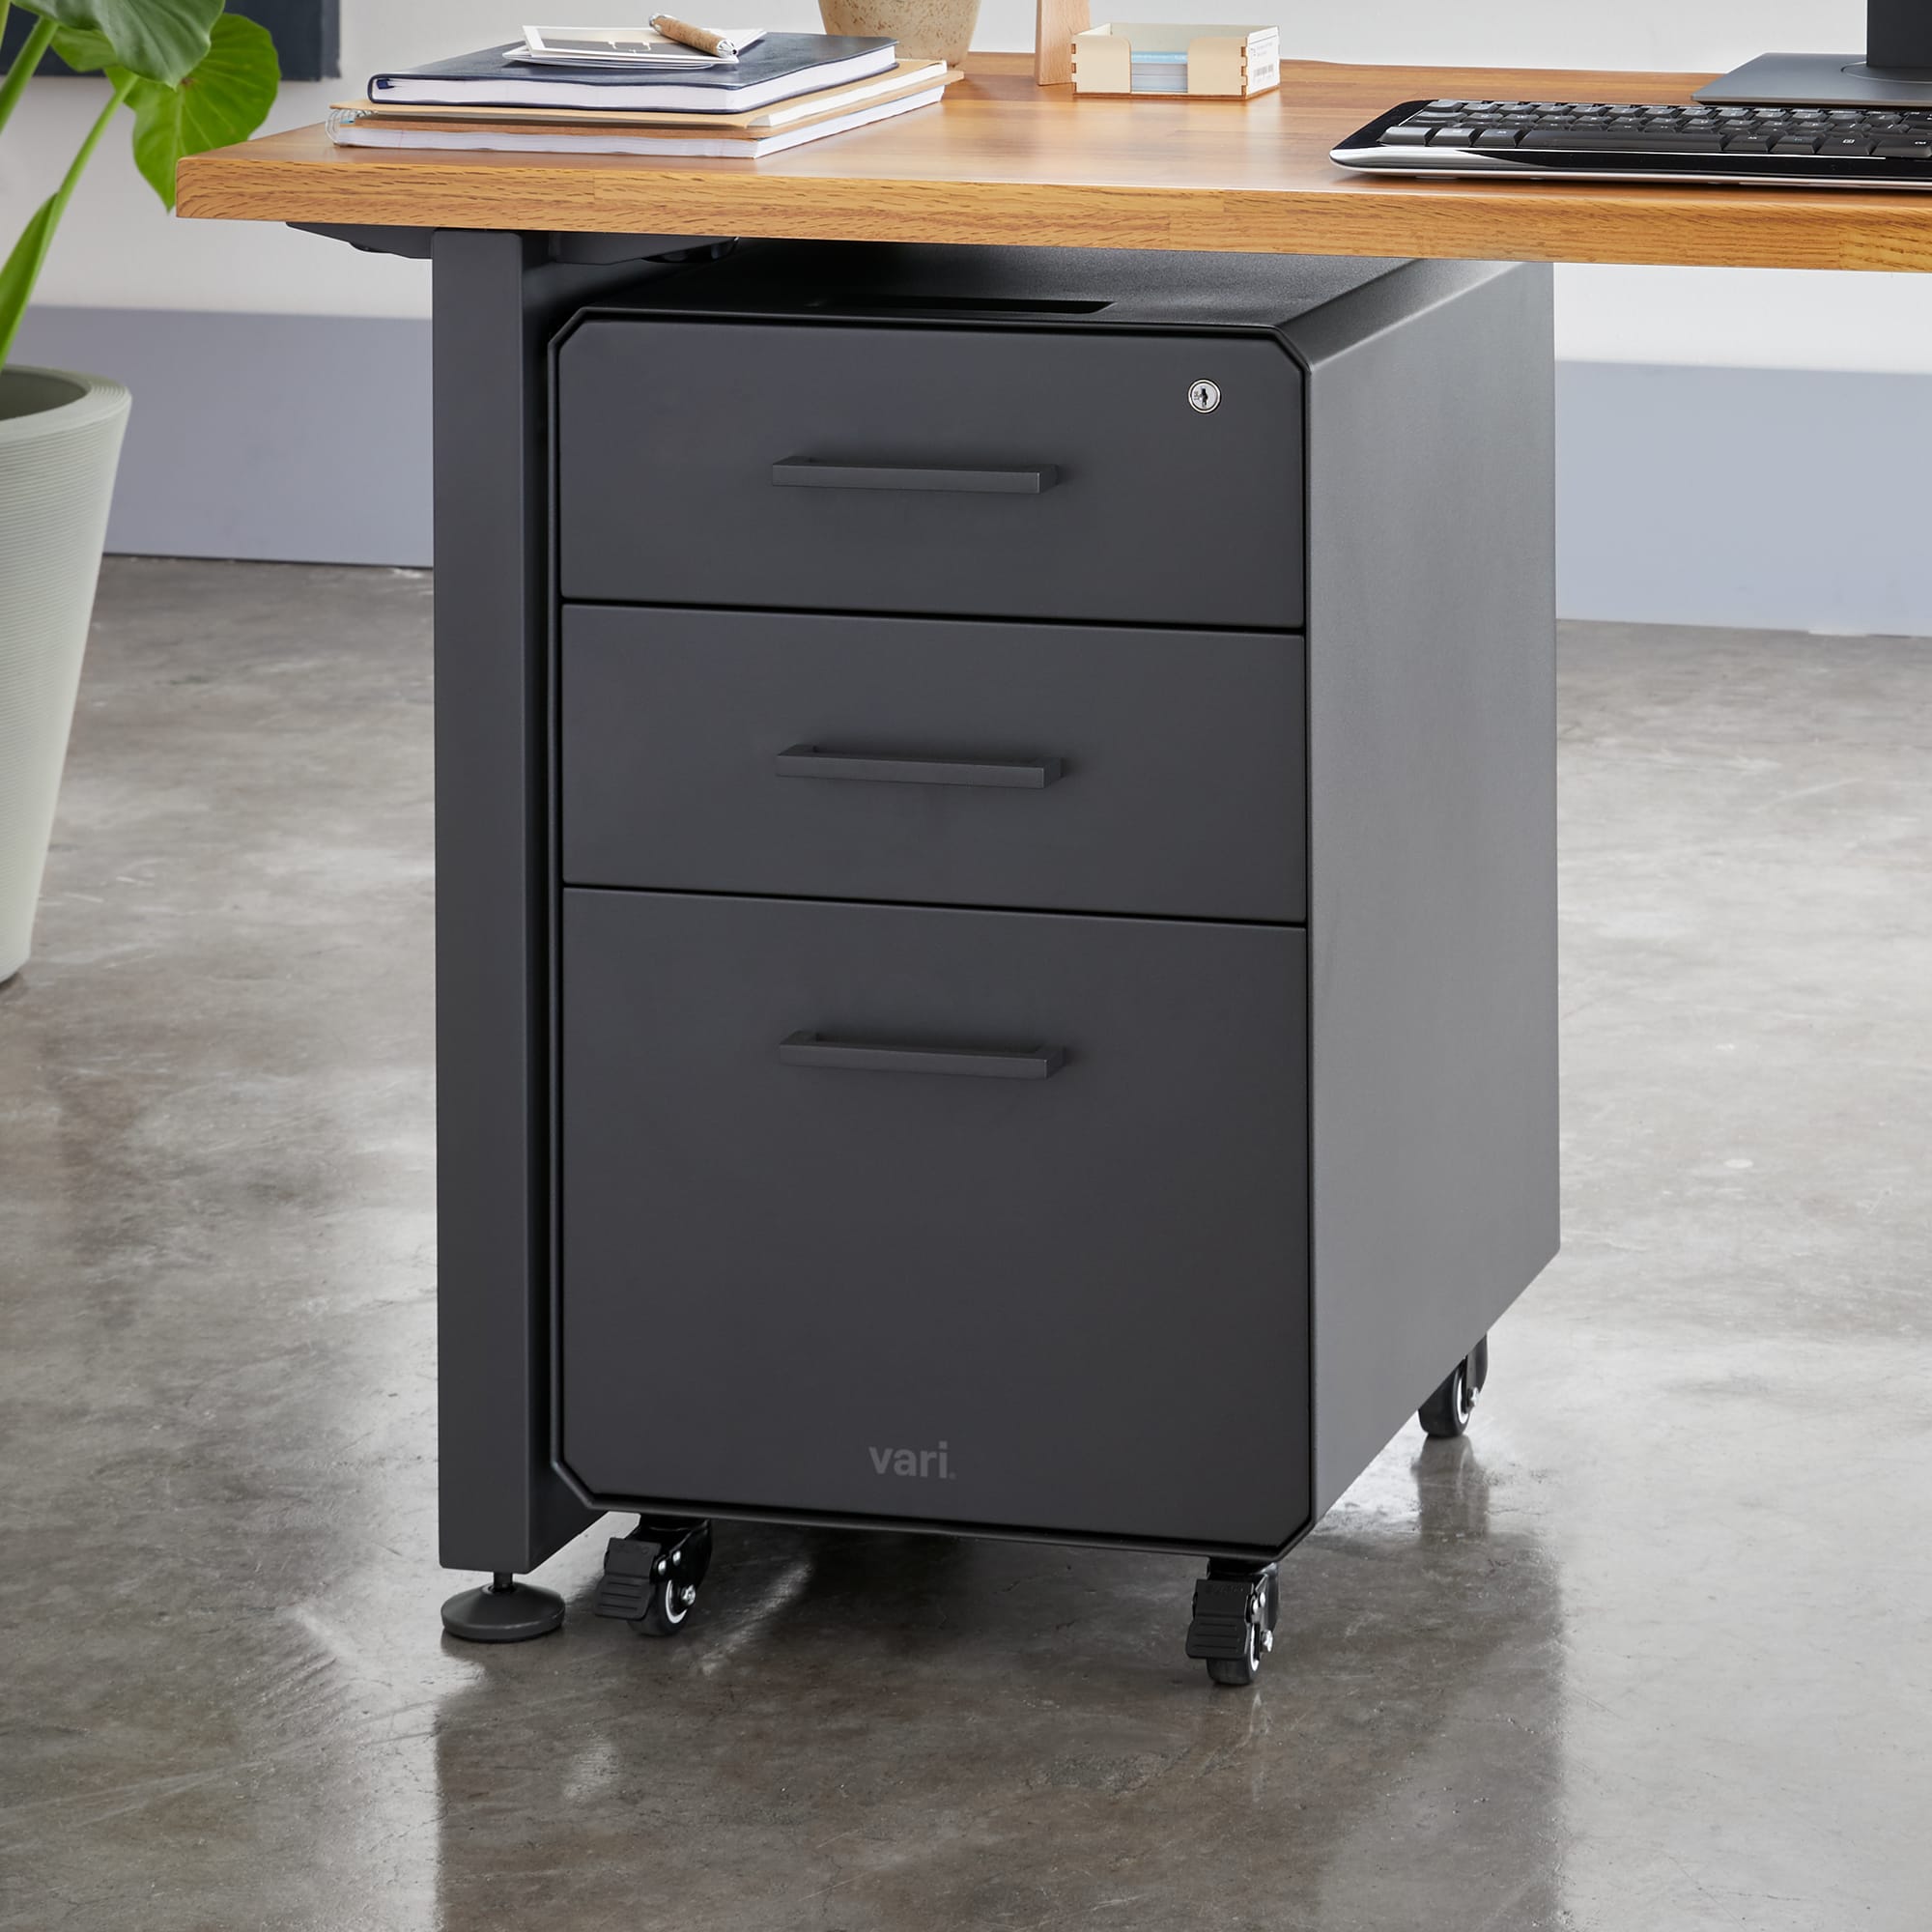 Lateral File Cabinet, Standing Desk Accessories